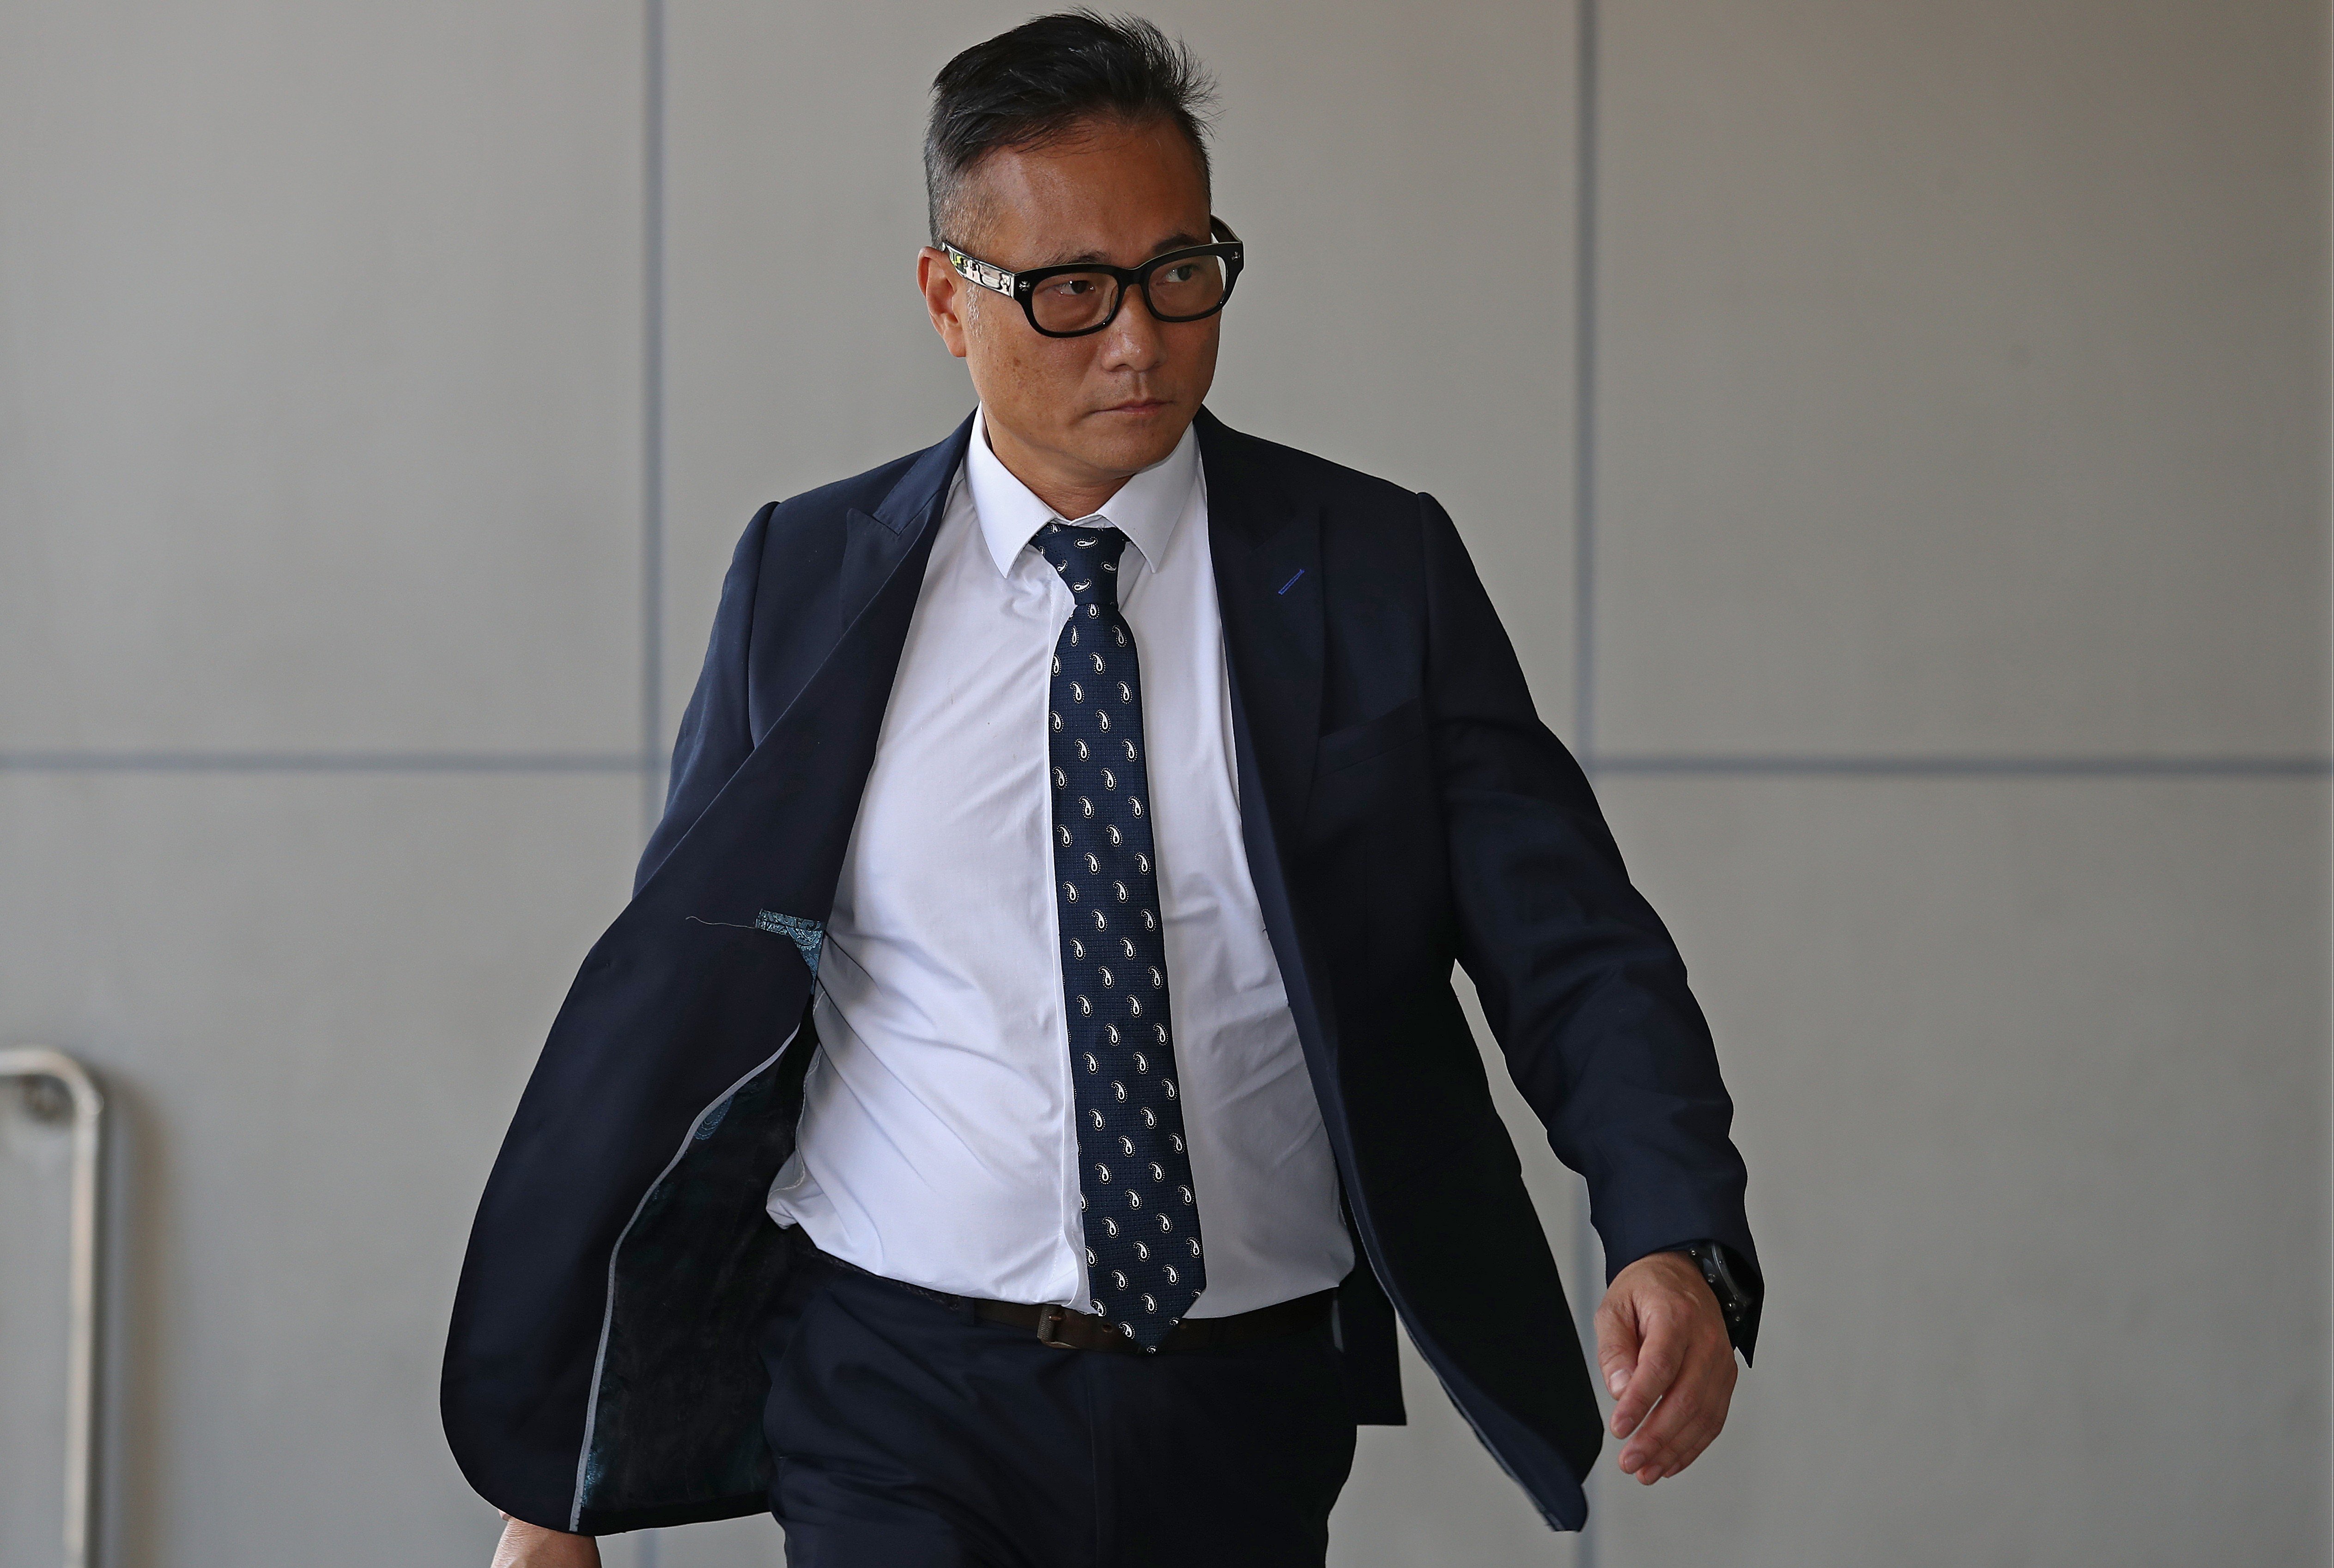 Police superintendent Ng Wai-hon accepted bribes of HK$114,000 on five occasions. Photo: Nora Tam